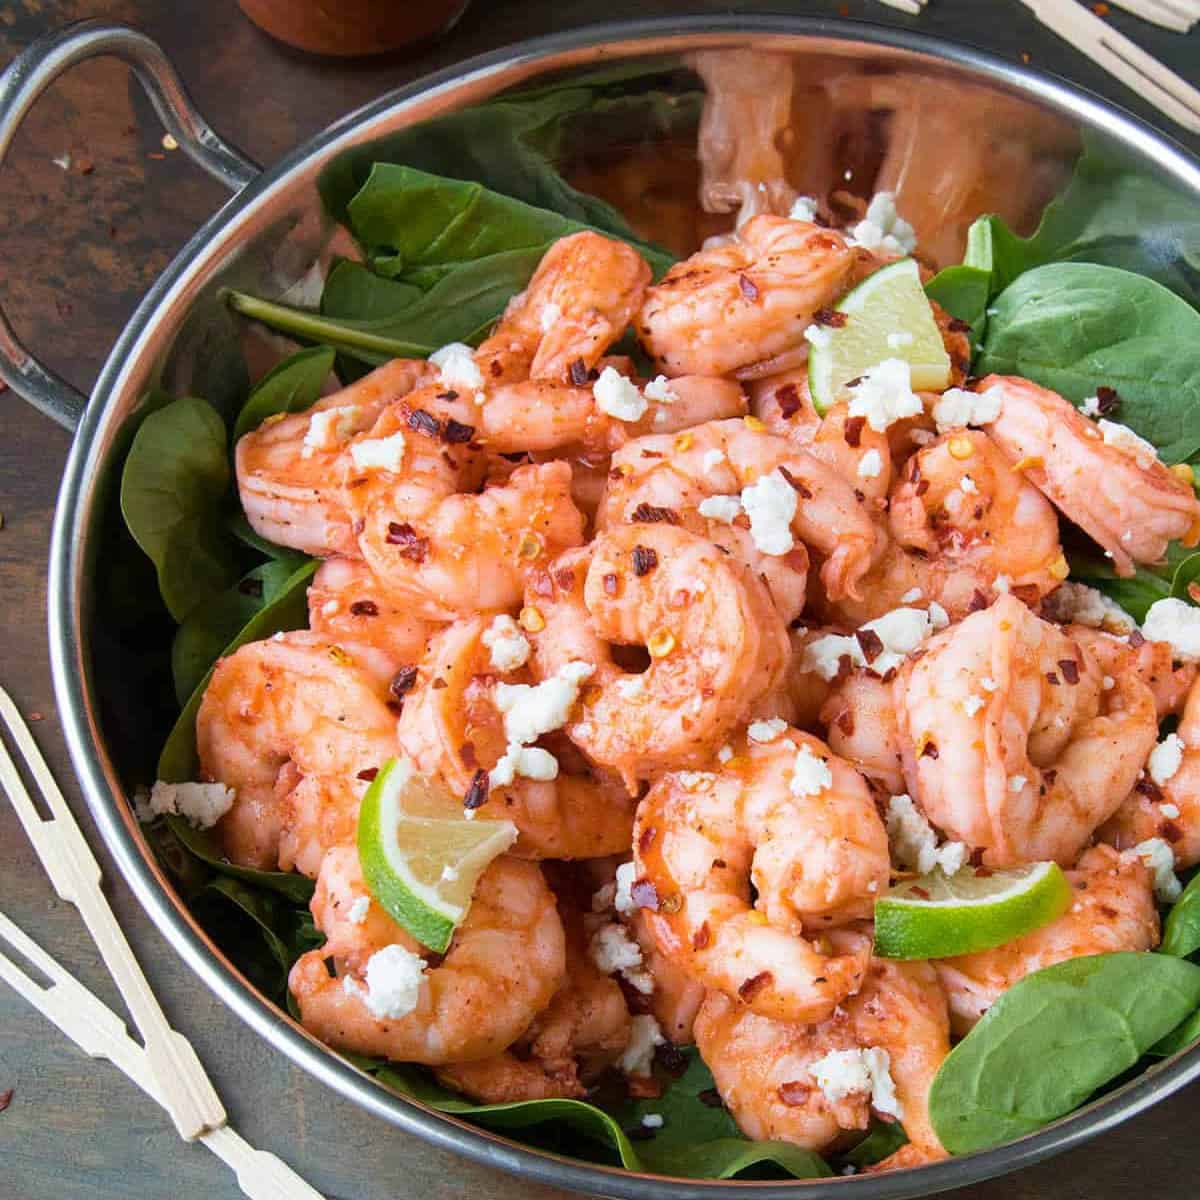 Bust out your grills for this easy grilled buffalo shrimp recipe tossed in ...